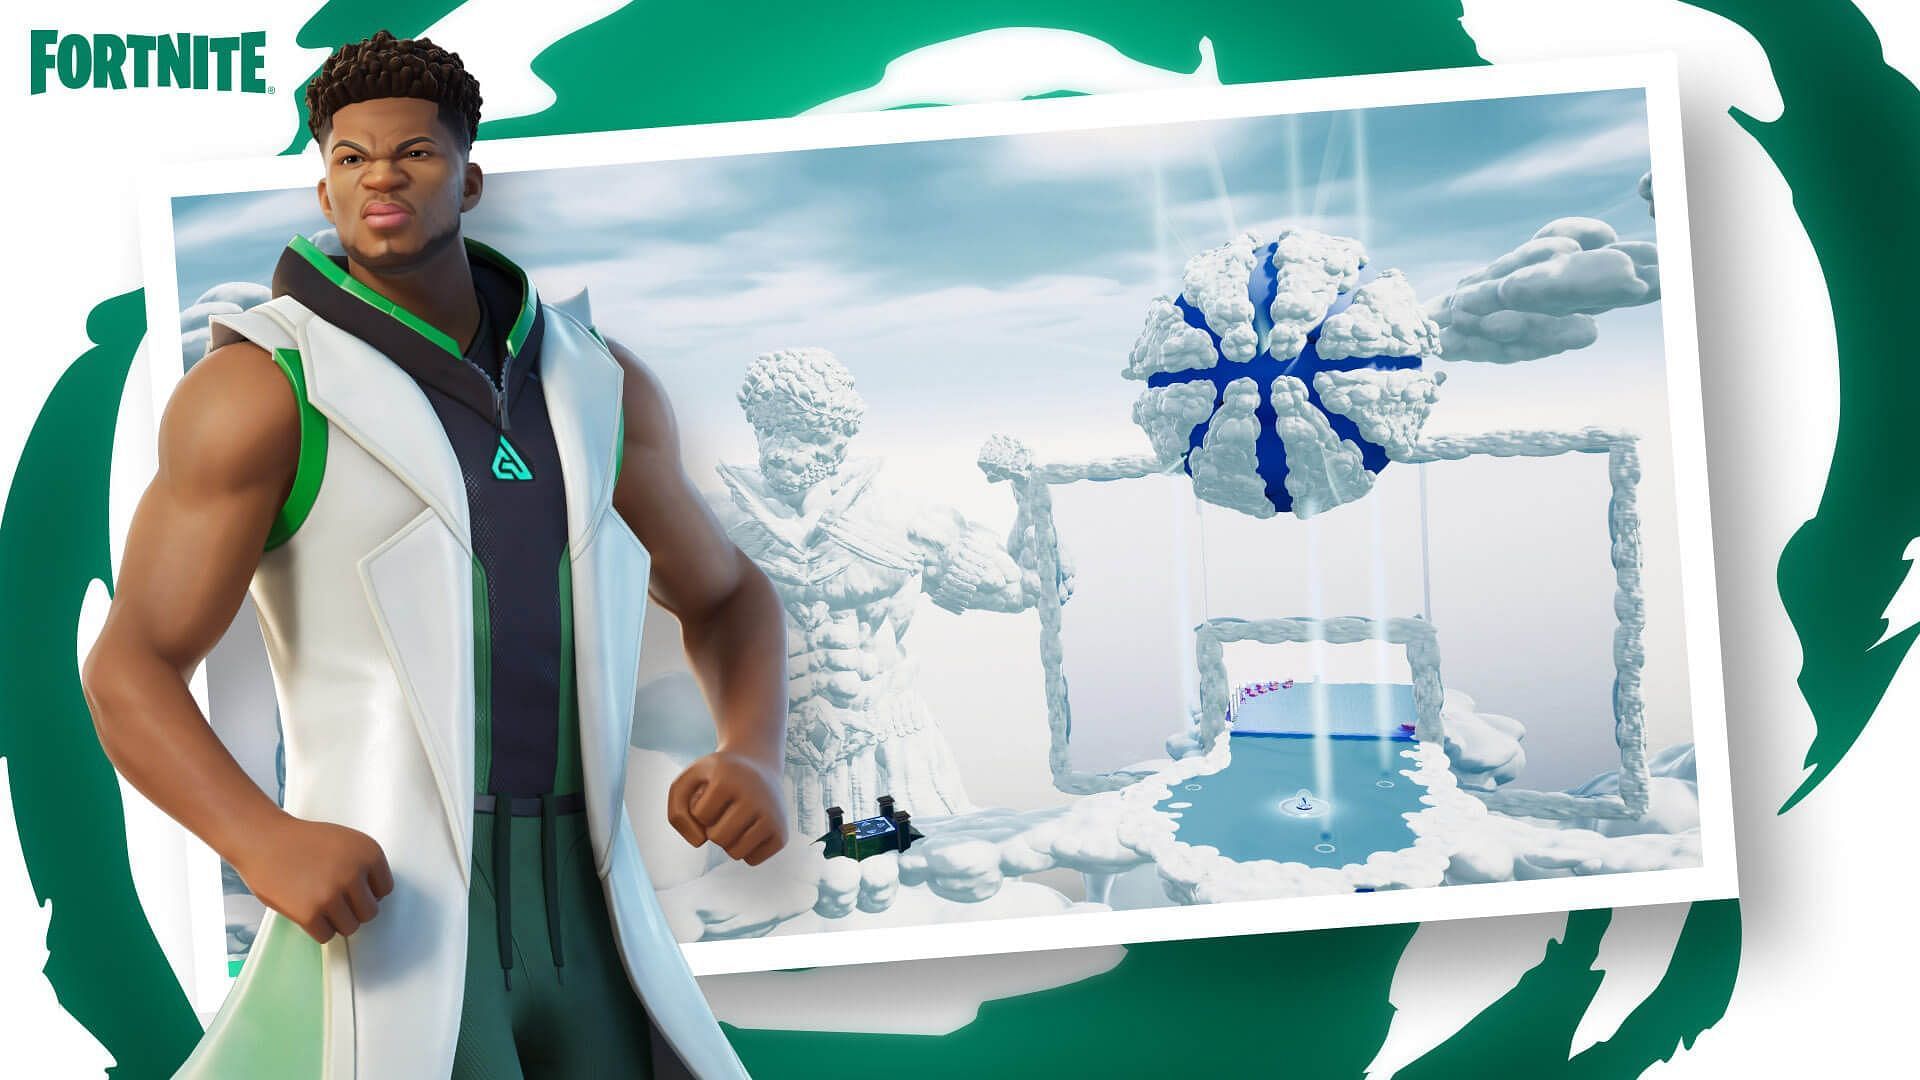 Giannis Antetokounmpo of the Milwaukee Bucks with the &quot;Dream Arena&quot; in Fortnite [Source: Epic Games]